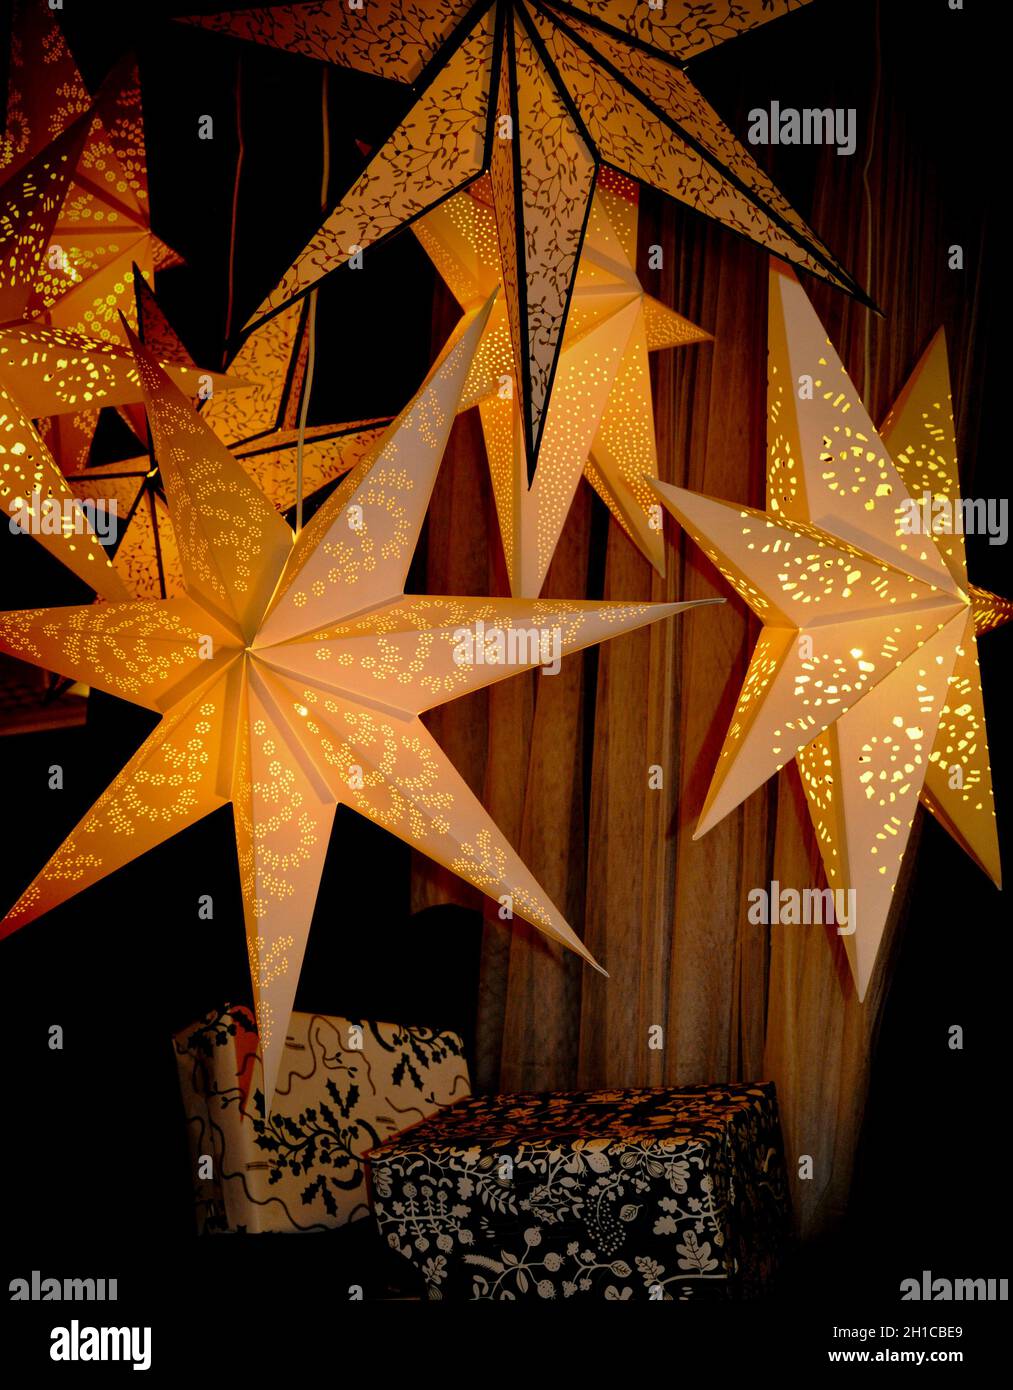 A display of light up paper star hanging decorations, IKEA, Sheffield Stock Photo